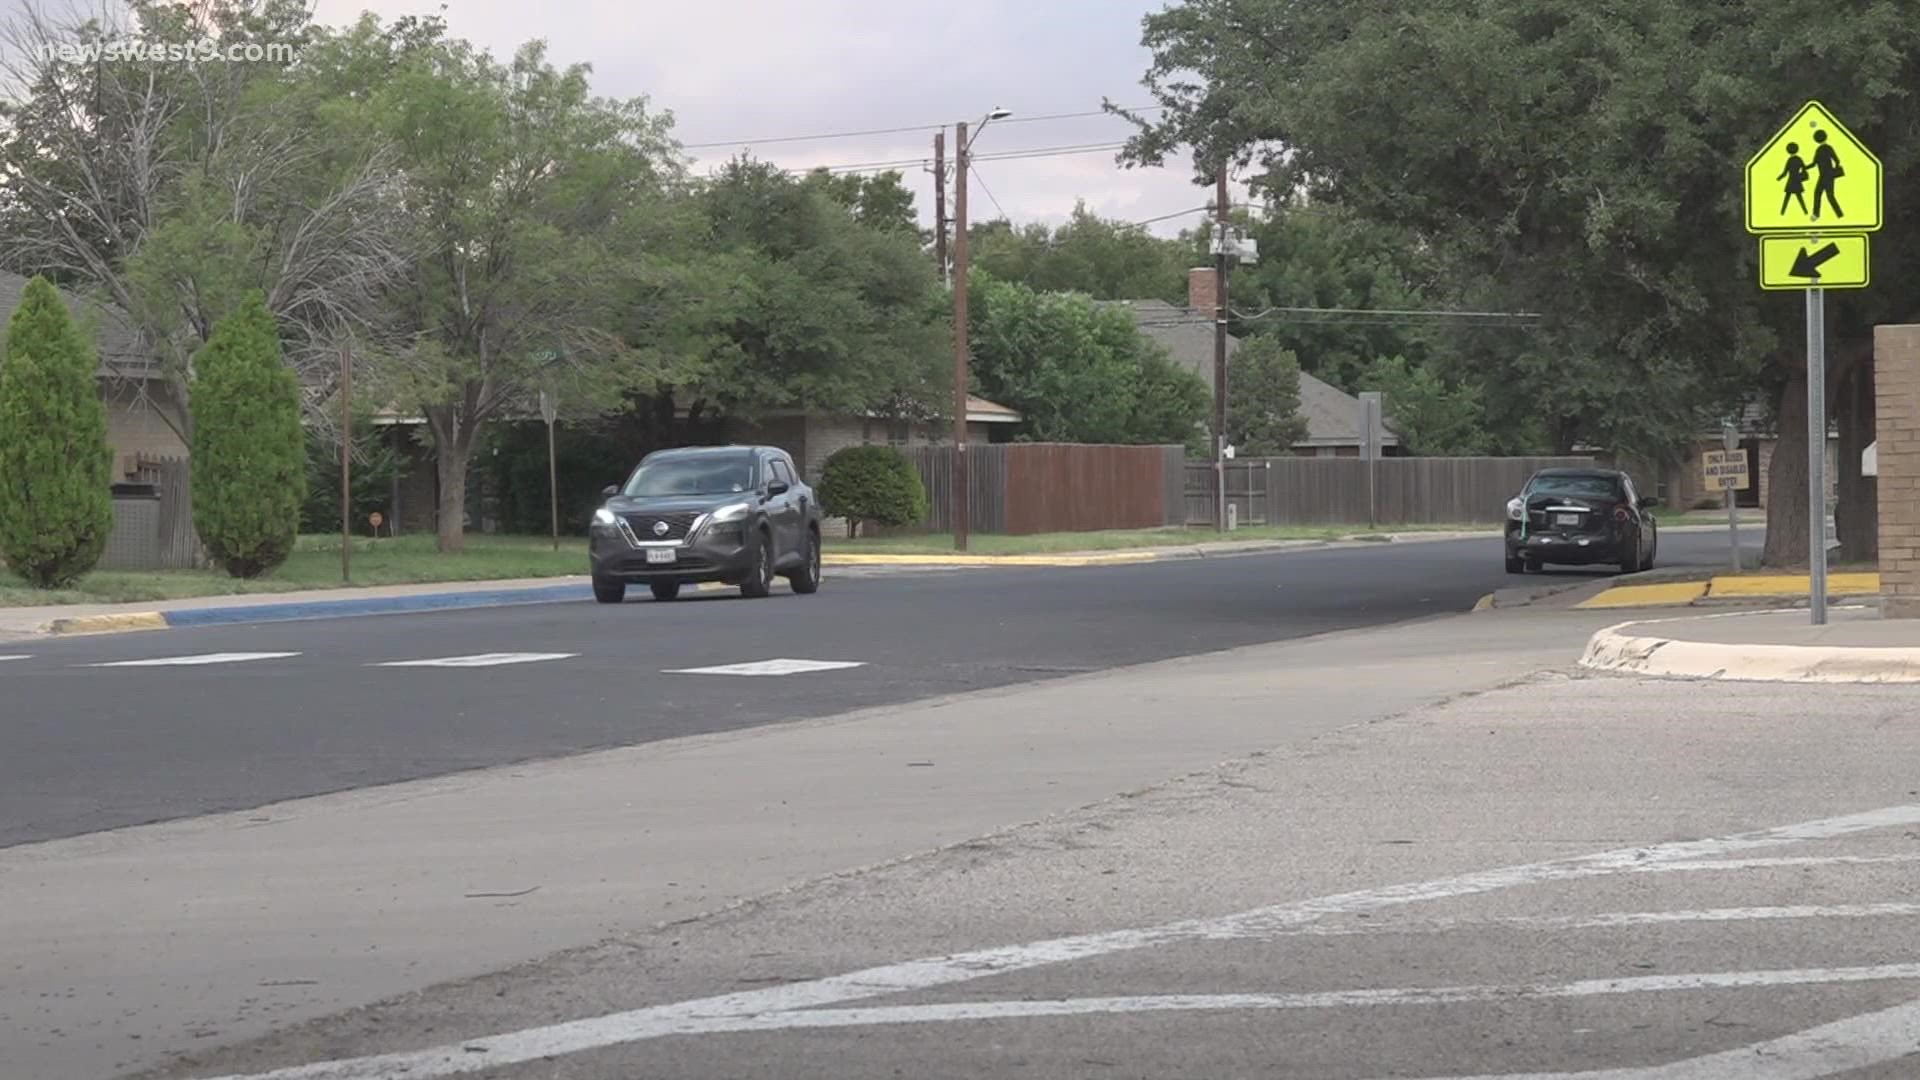 One Midland mom doesn't let her kids walk to school because of too many cars speeding in school zones and the absence of much needed crossing guards.